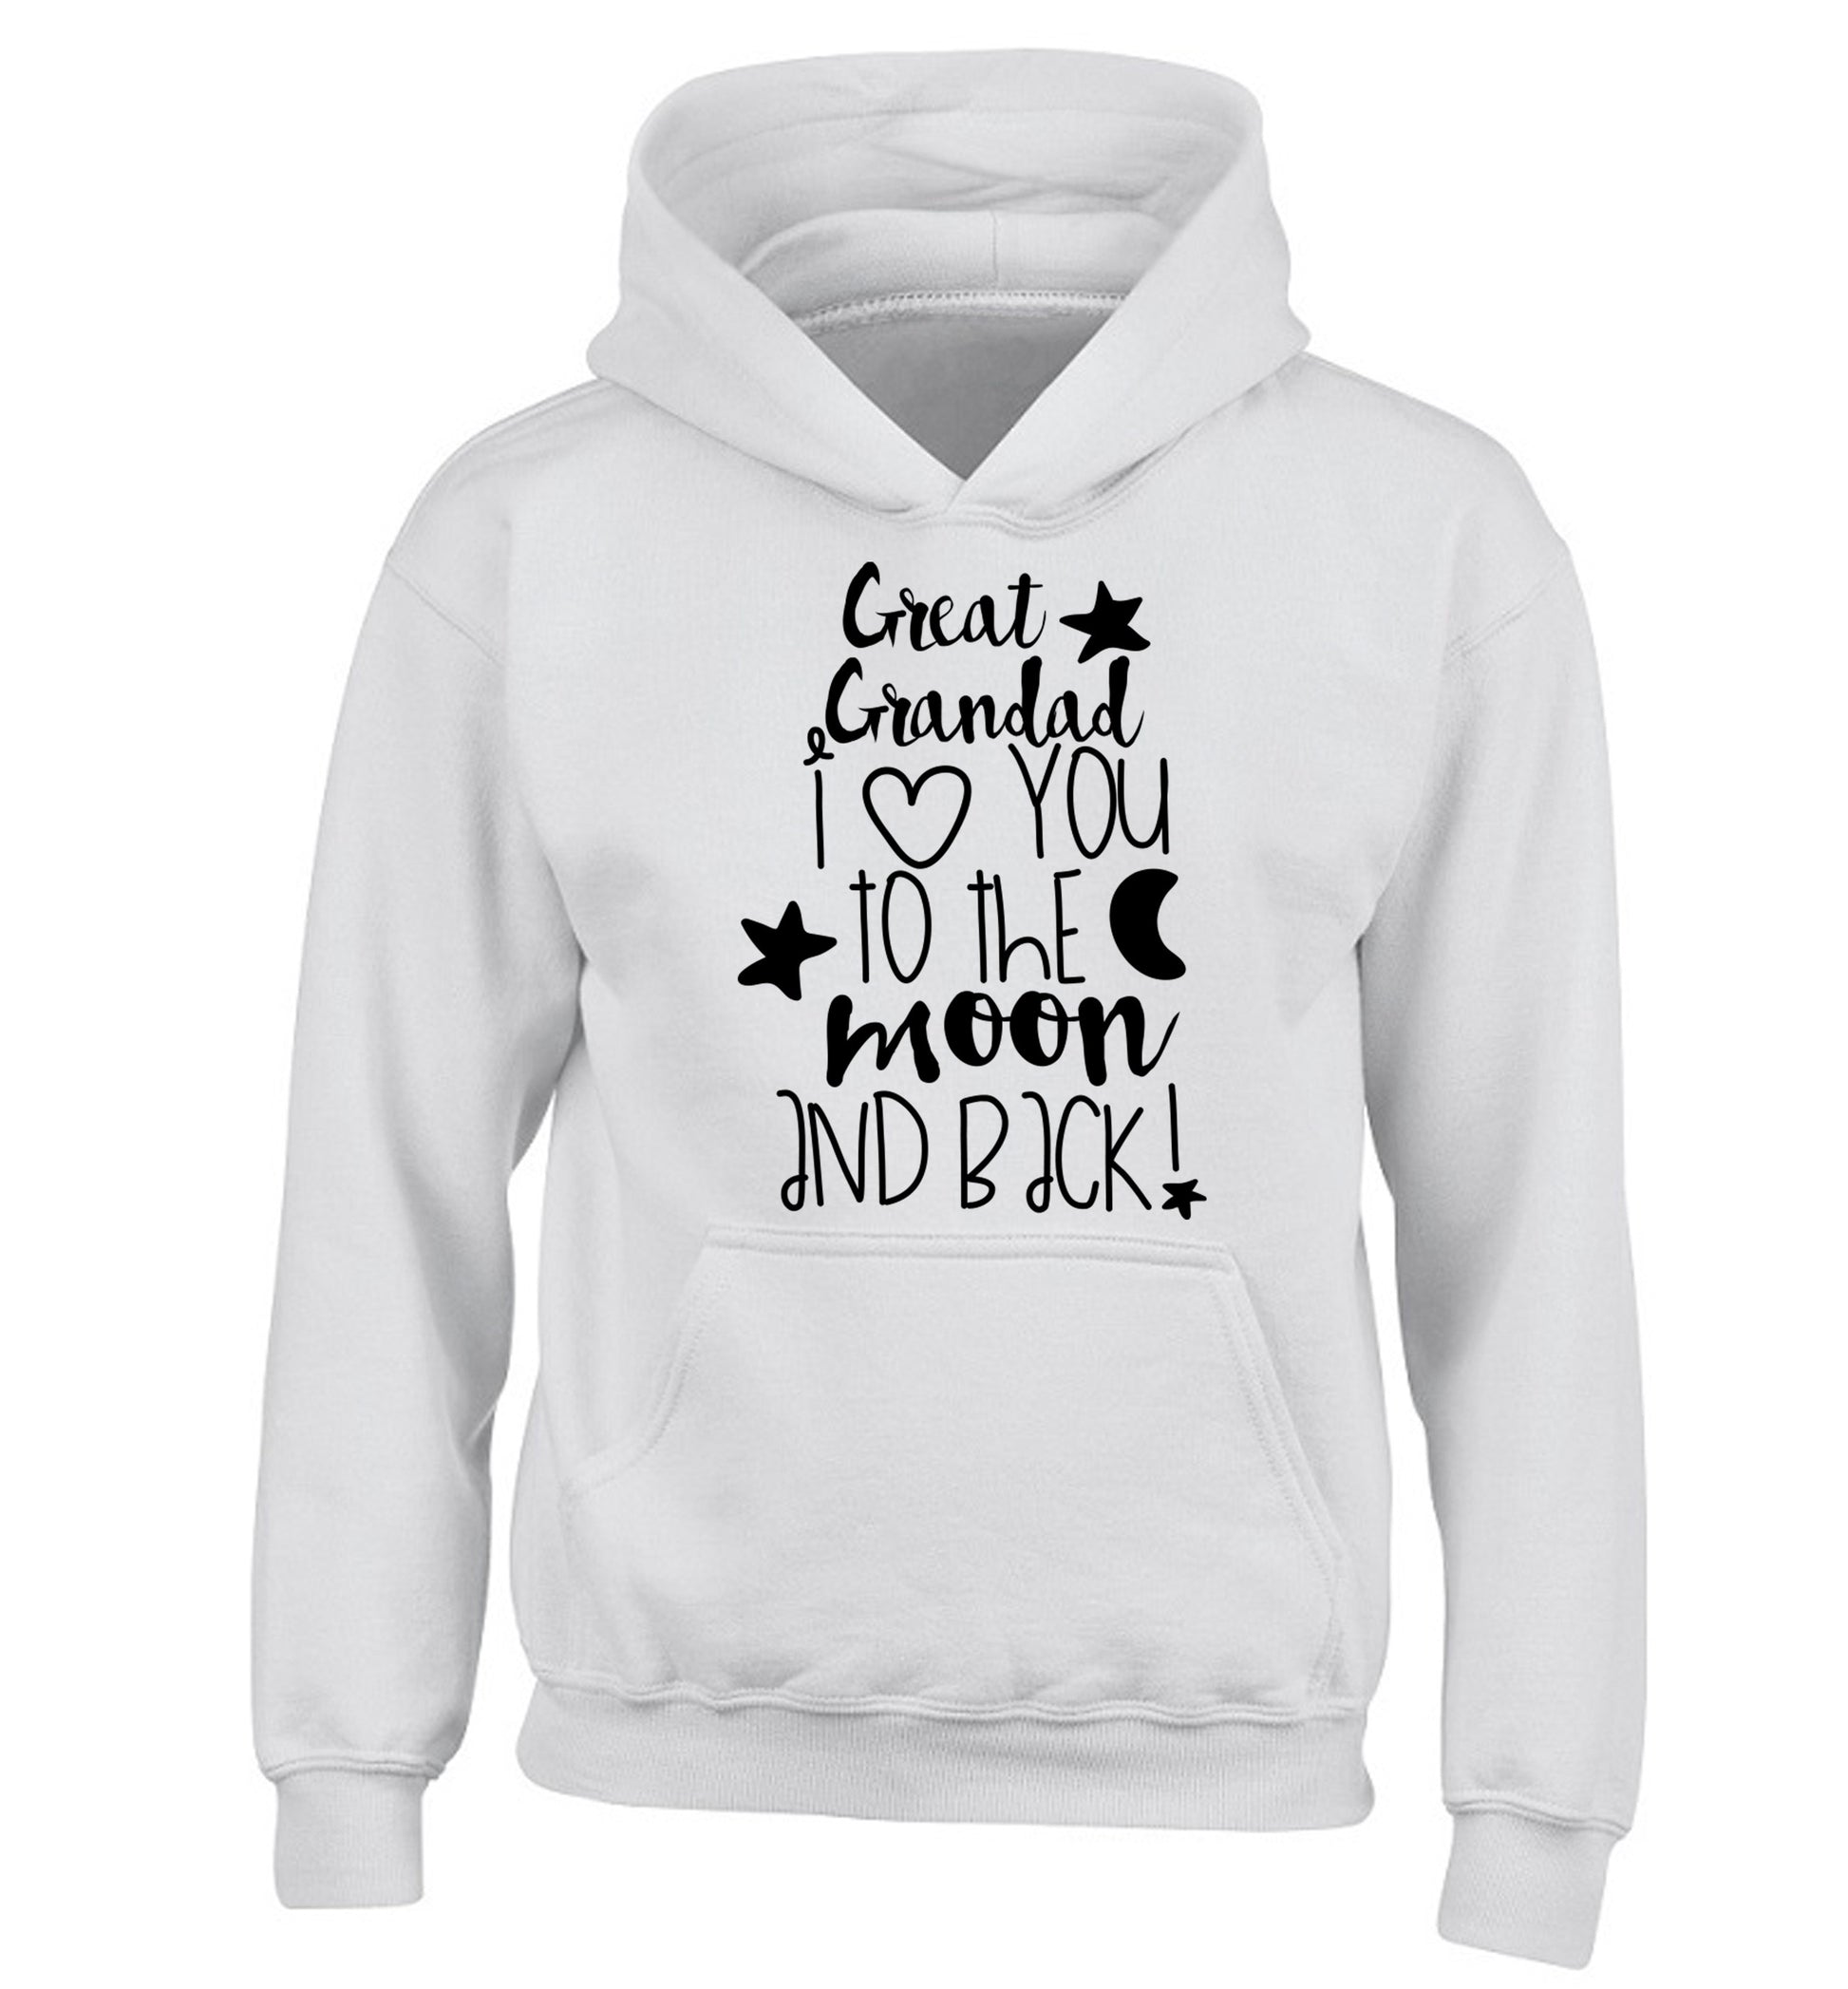 Great Grandad I love you to the moon and back children's white hoodie 12-14 Years